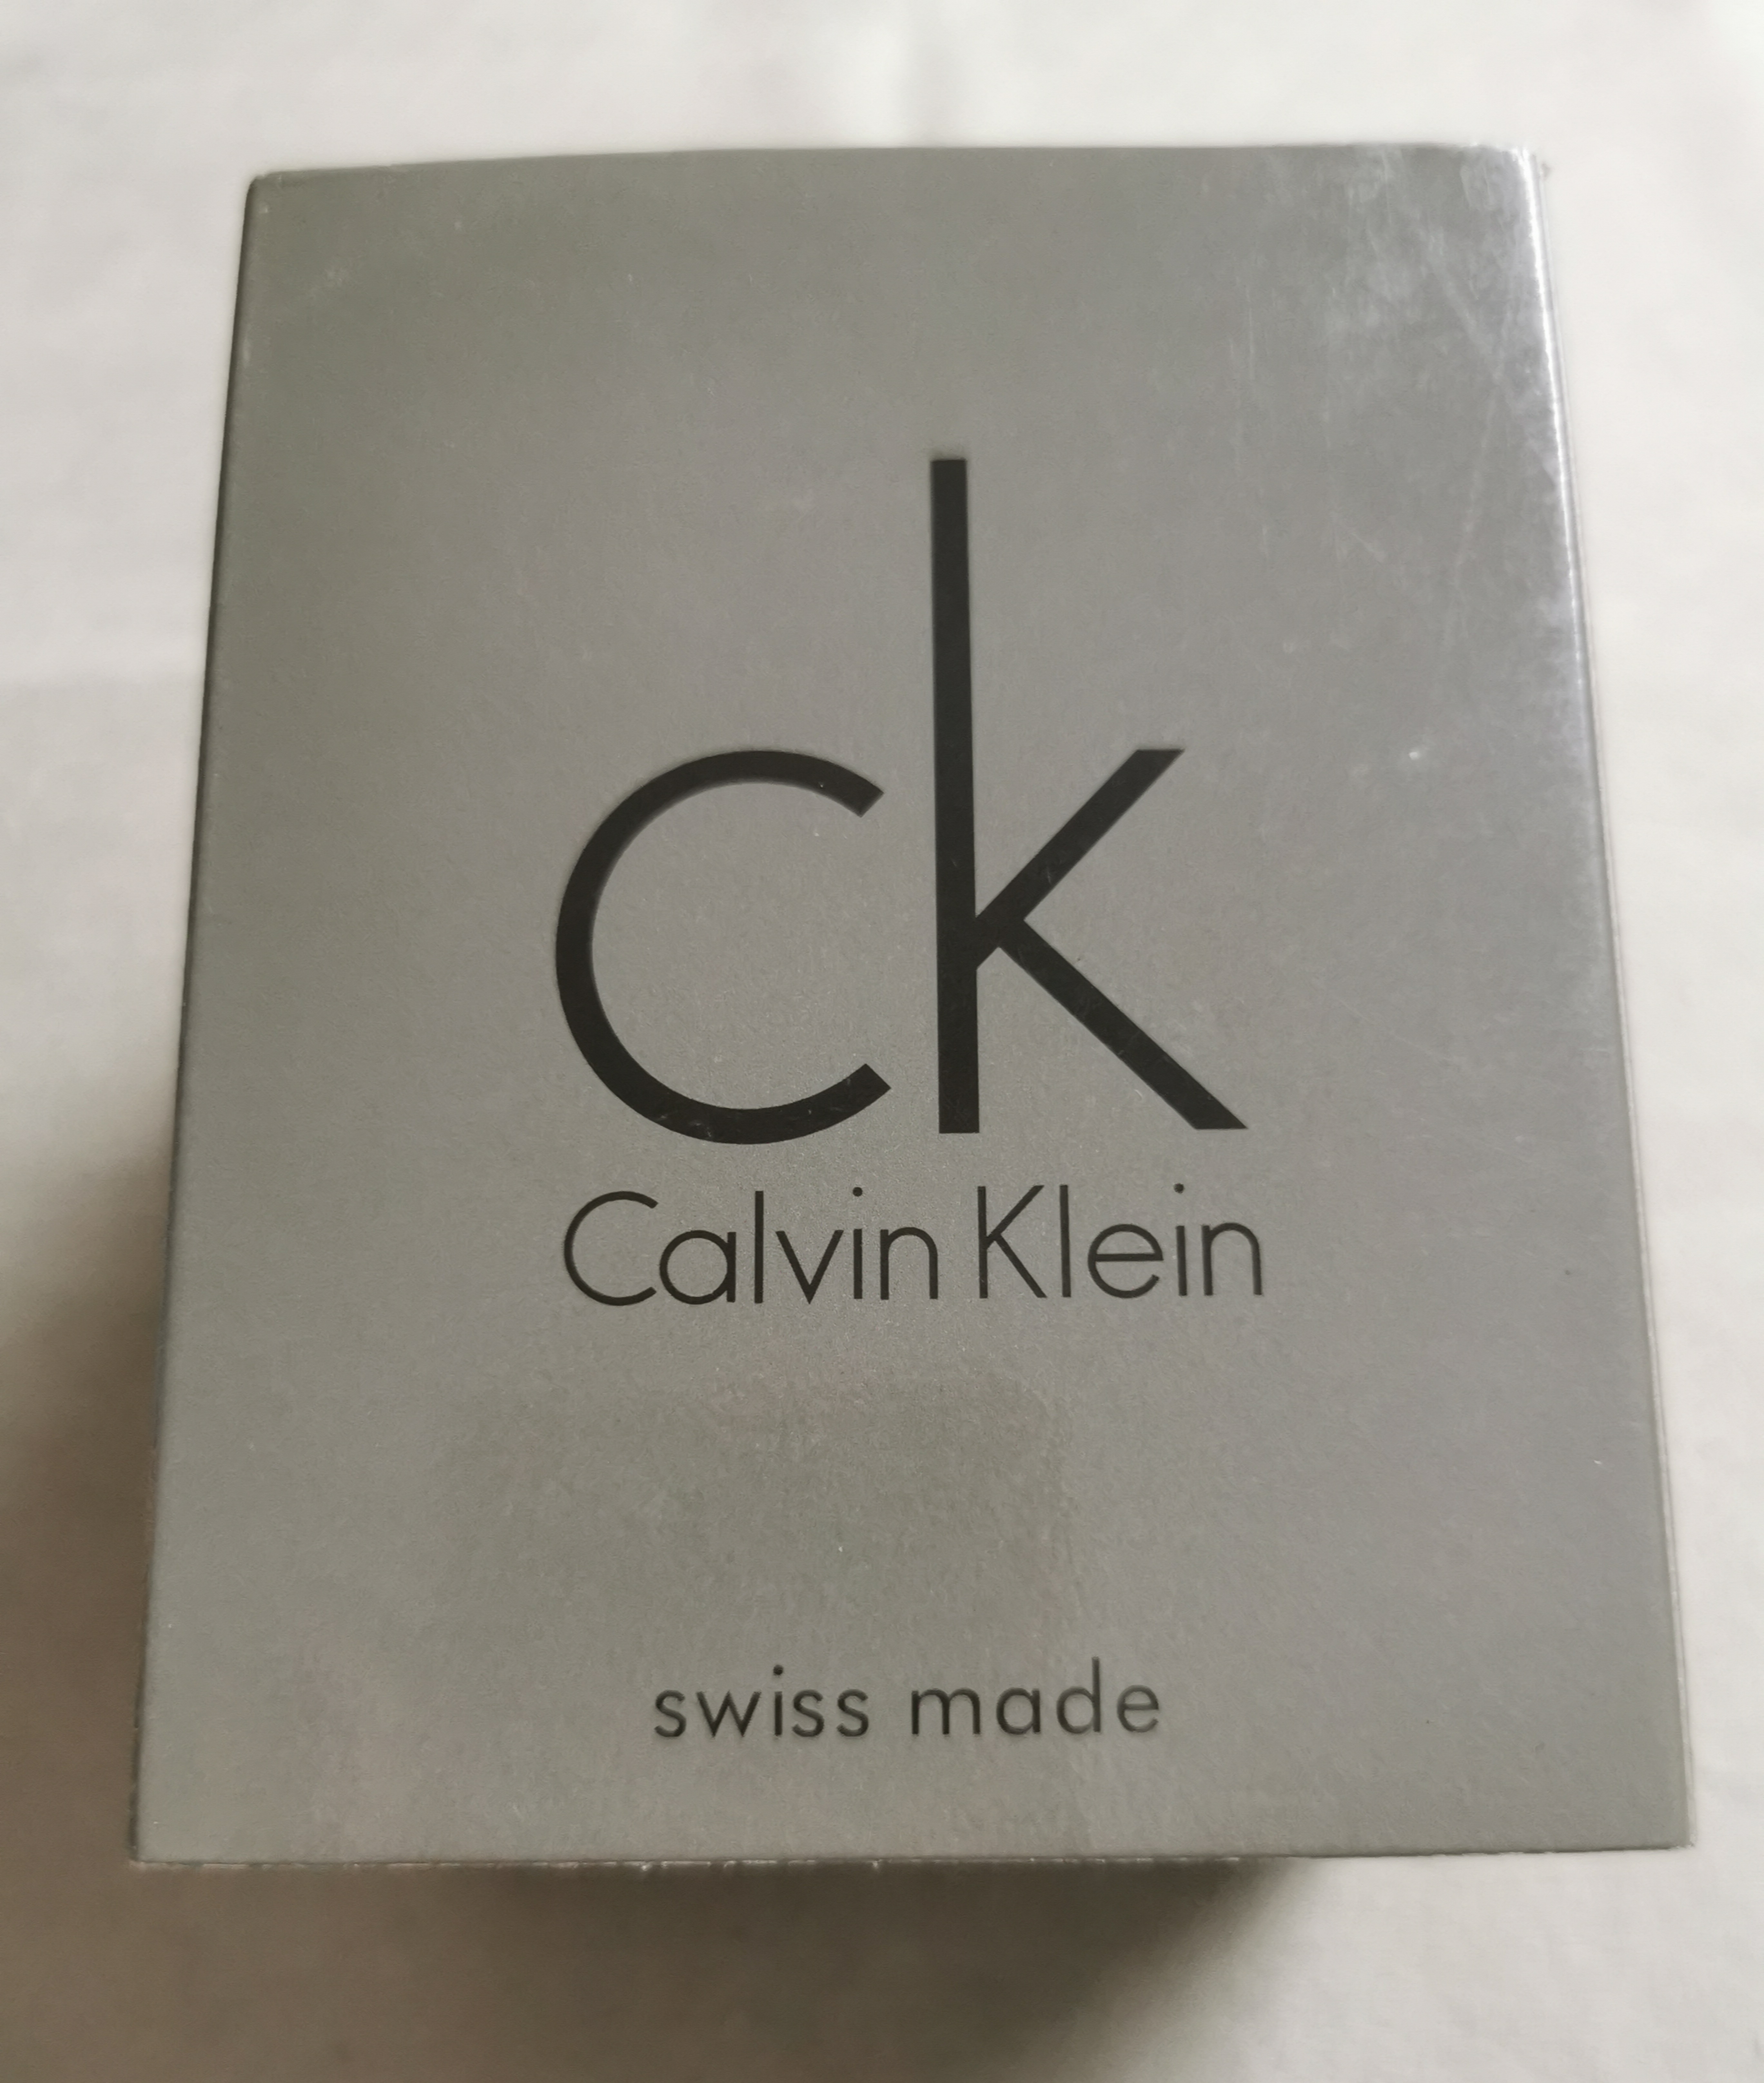 ck Calvin Klein vintage metal and plastic watch box gunmetal for any models like new condition | San Giorgio a Cremano